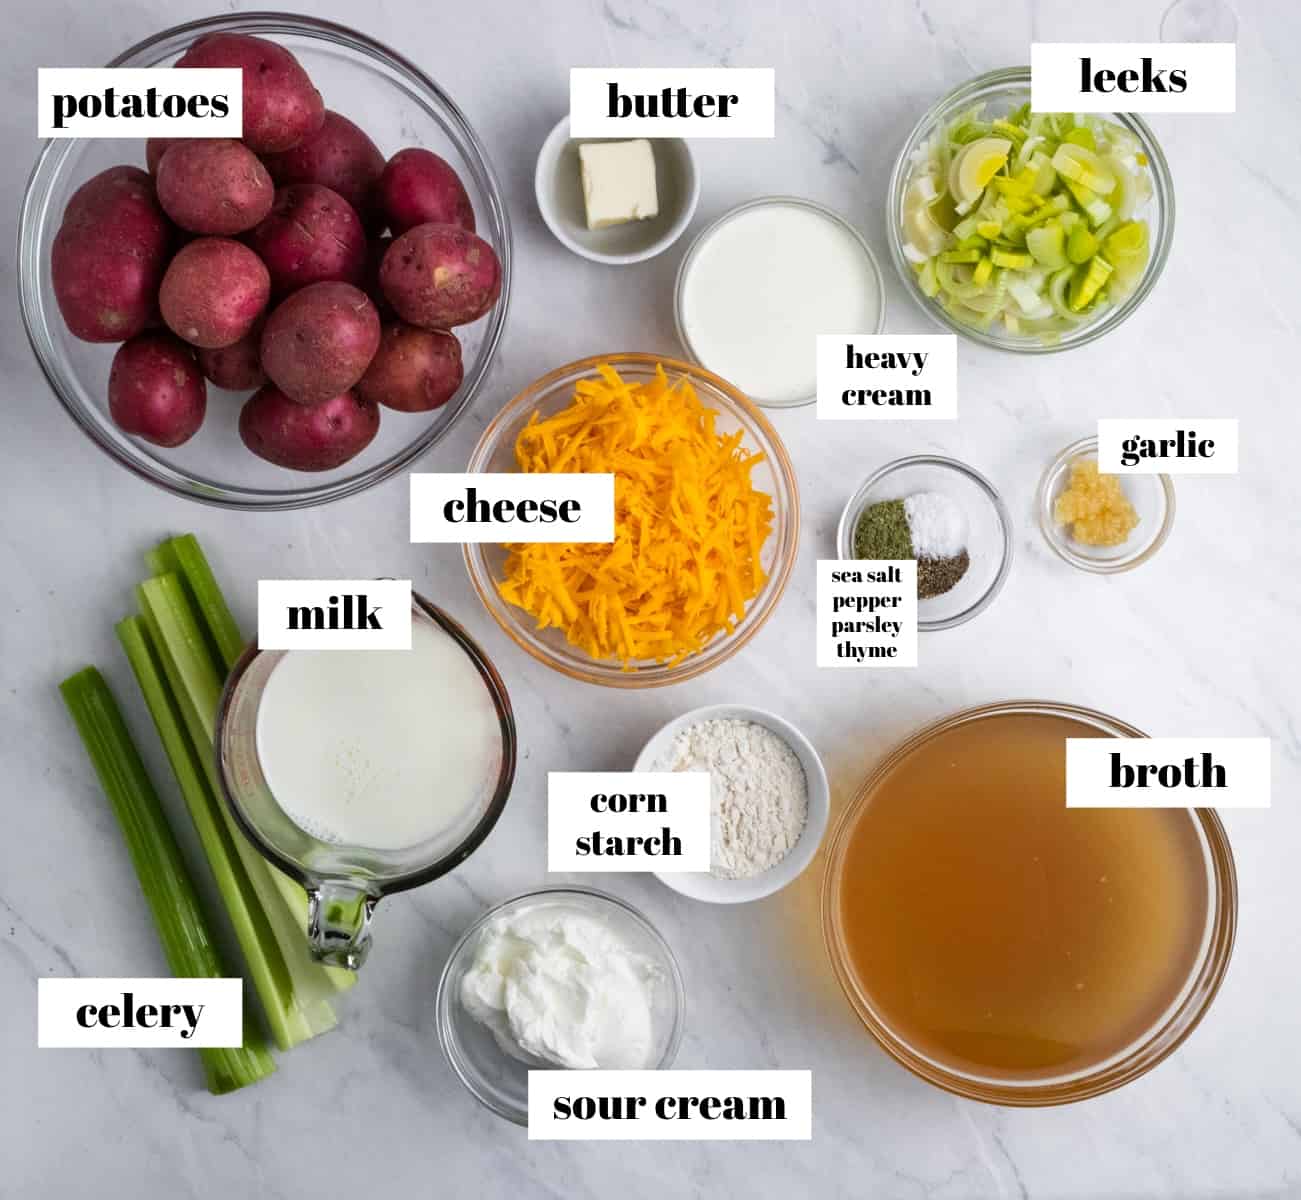 Potatoes, cheese, celery, cream and other soup ingredients labeled.